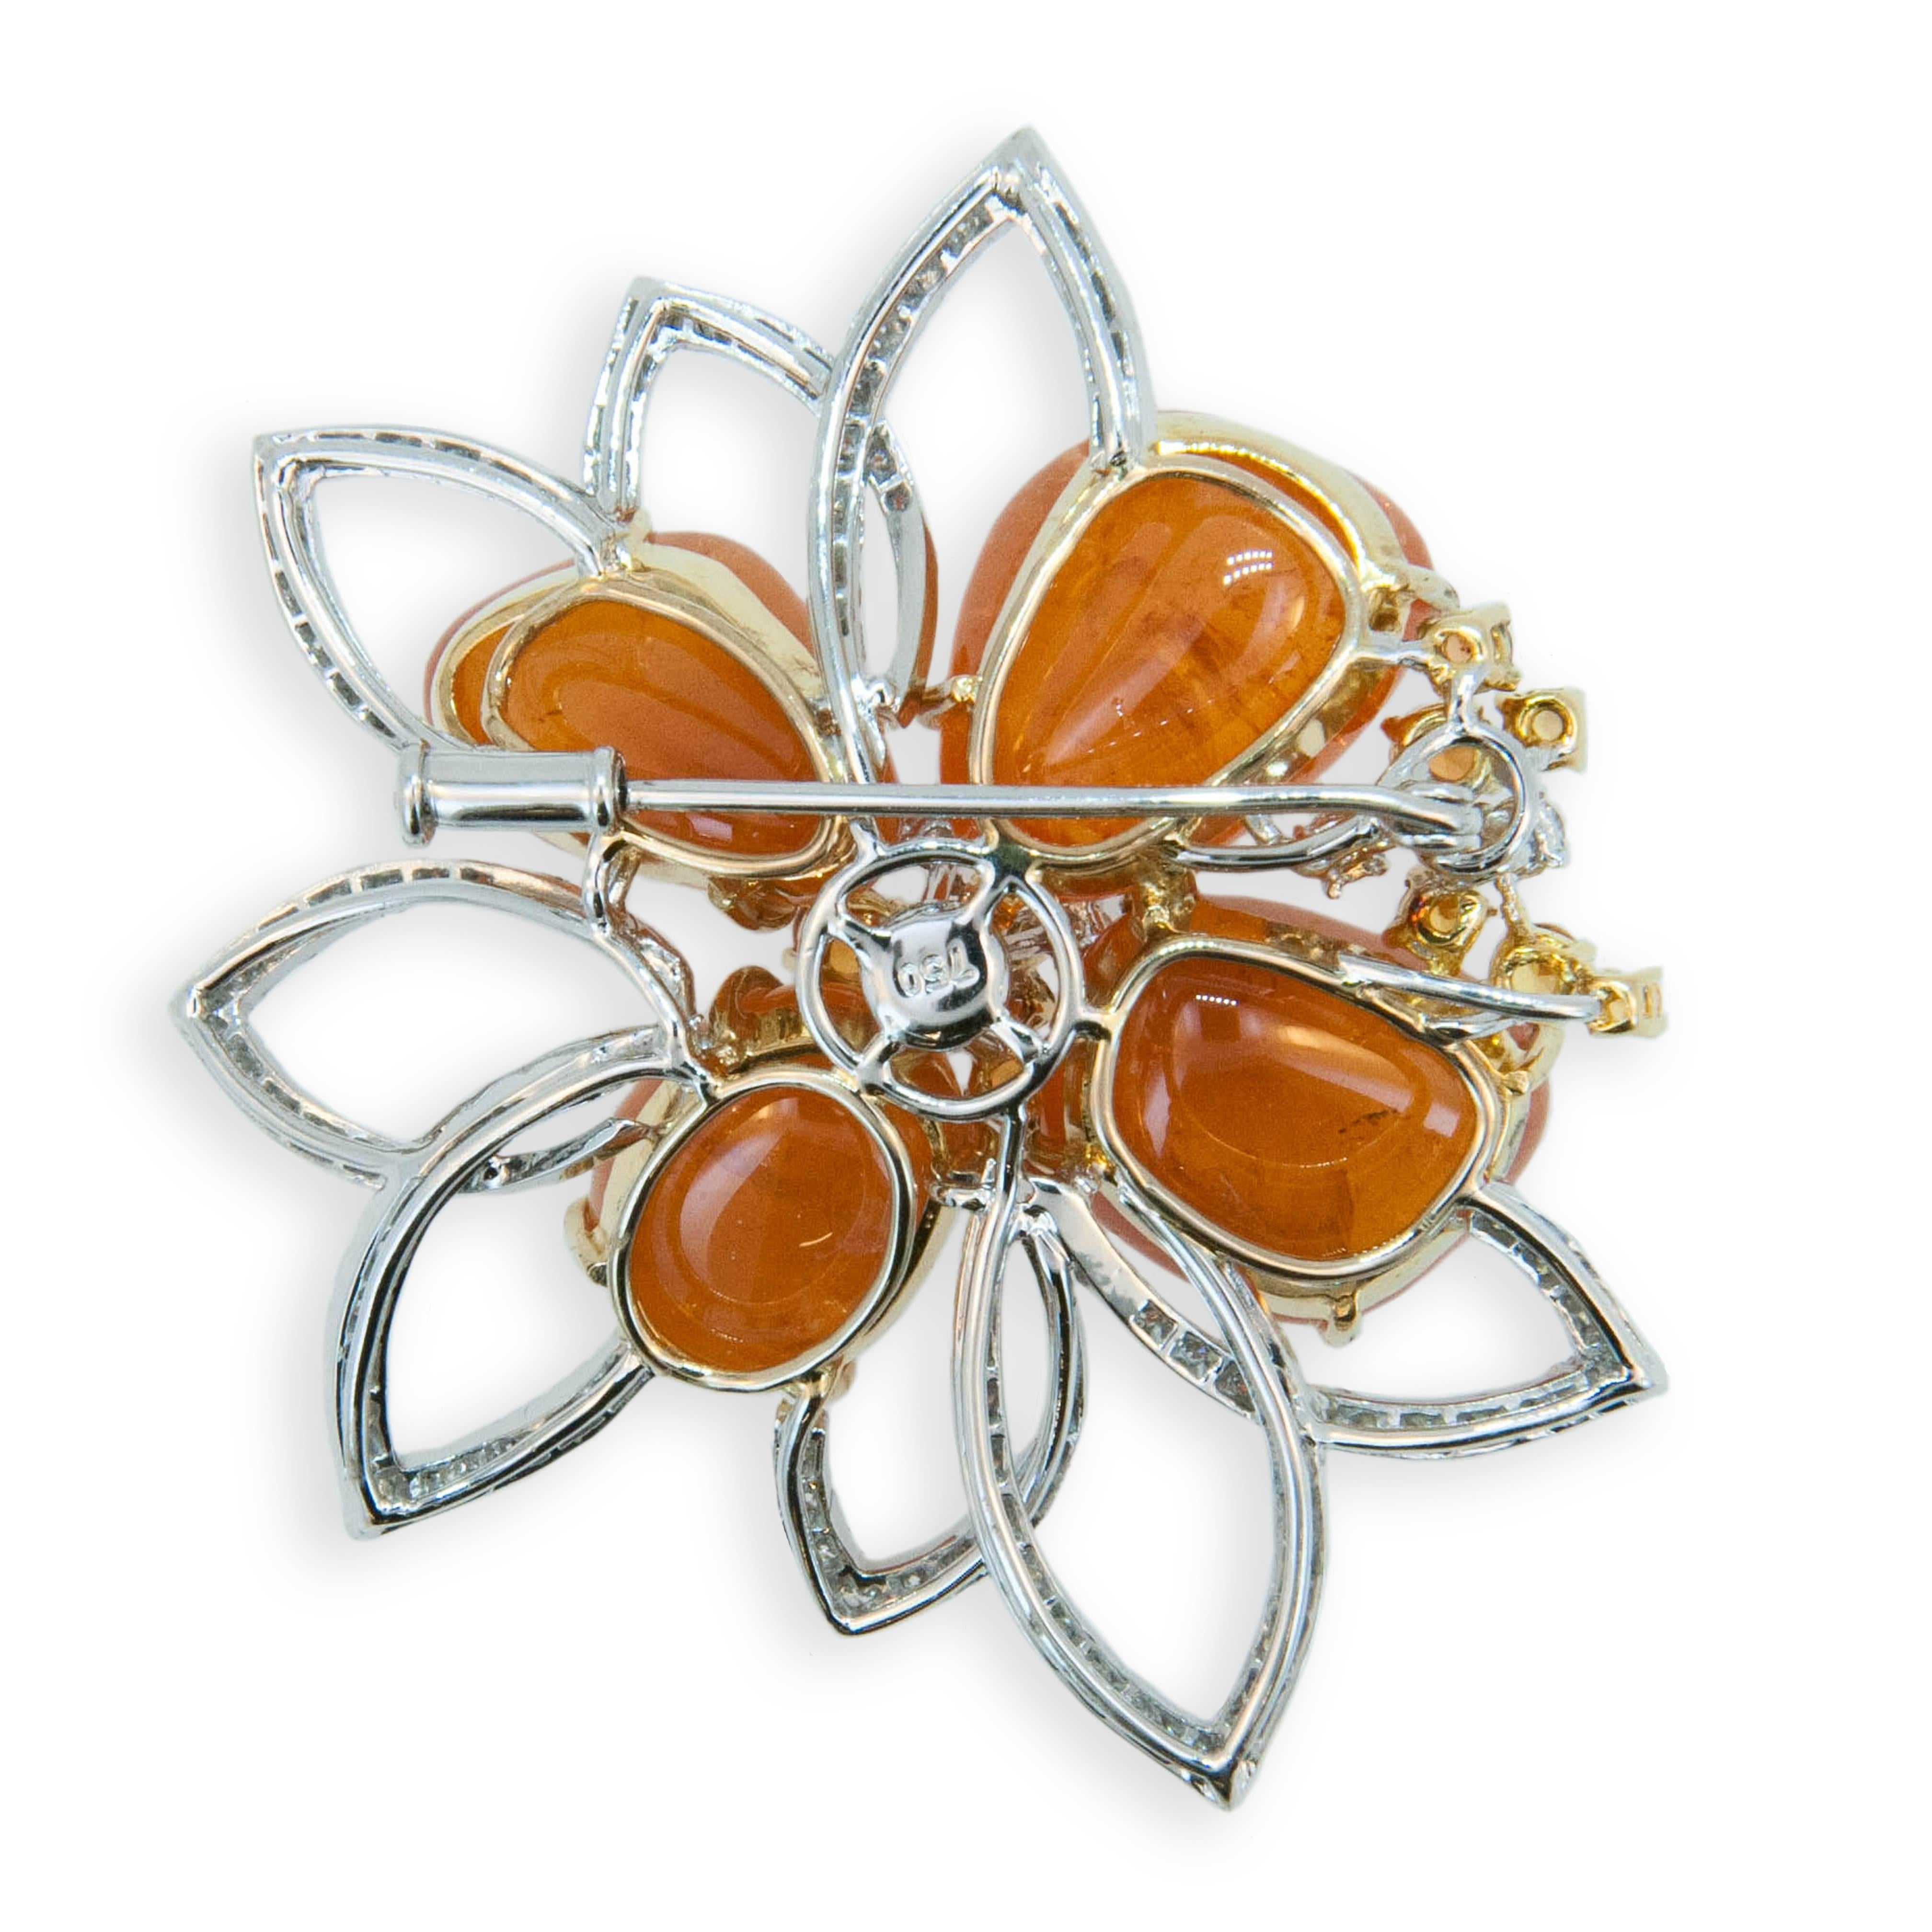 18 karat yellow and white gold brooch with Mandarin Garnet 63.09 carats total weight. Ten Yellow and Orange Sapphires 0.82 carats total weight. 112 Round diamonds 1.47 carats total weight.